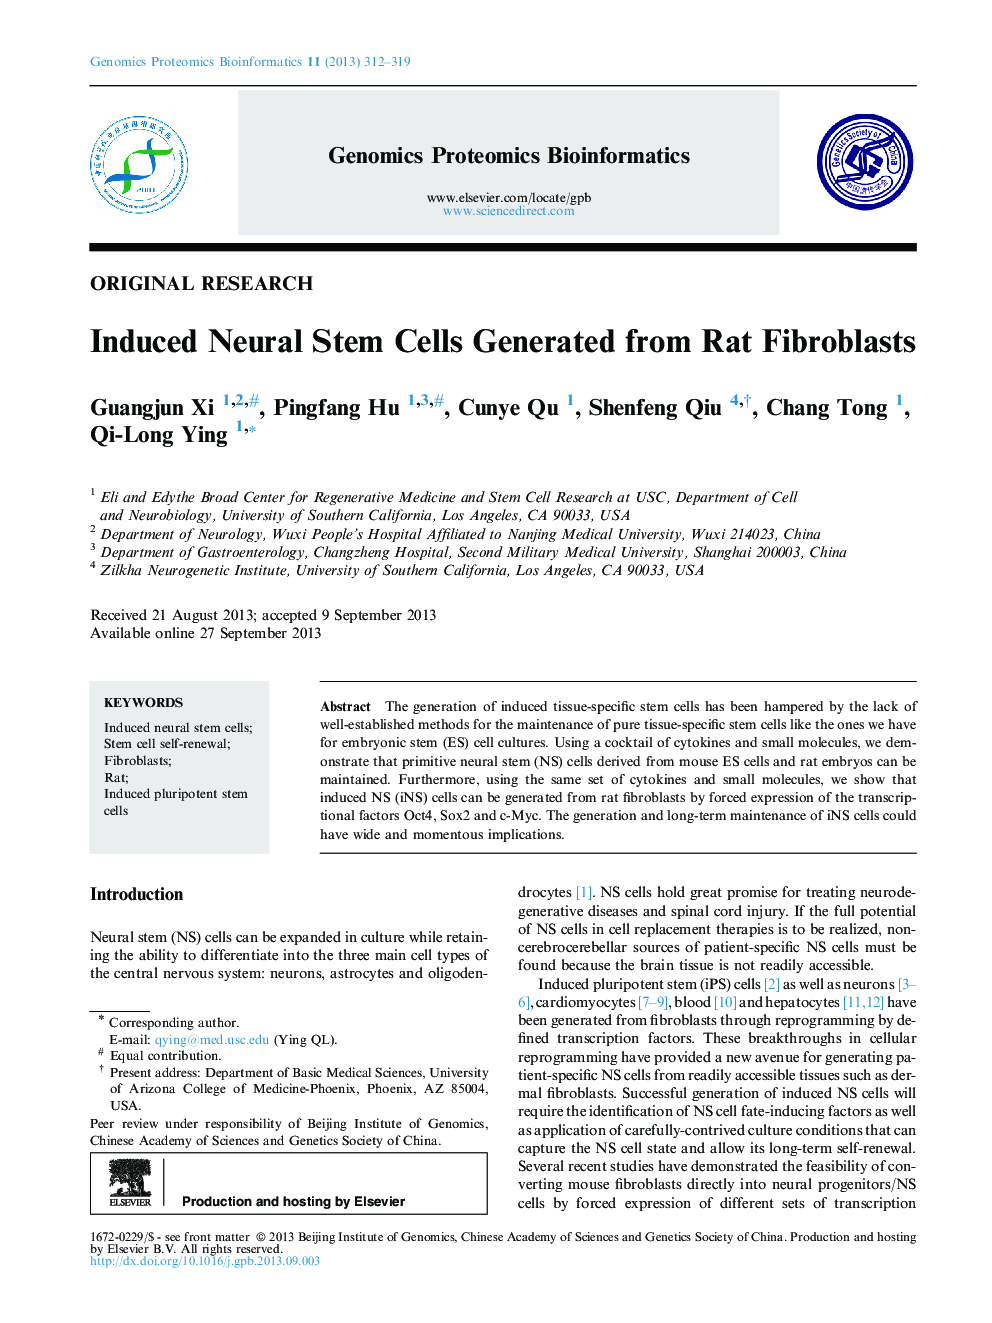 Induced Neural Stem Cells Generated from Rat Fibroblasts 